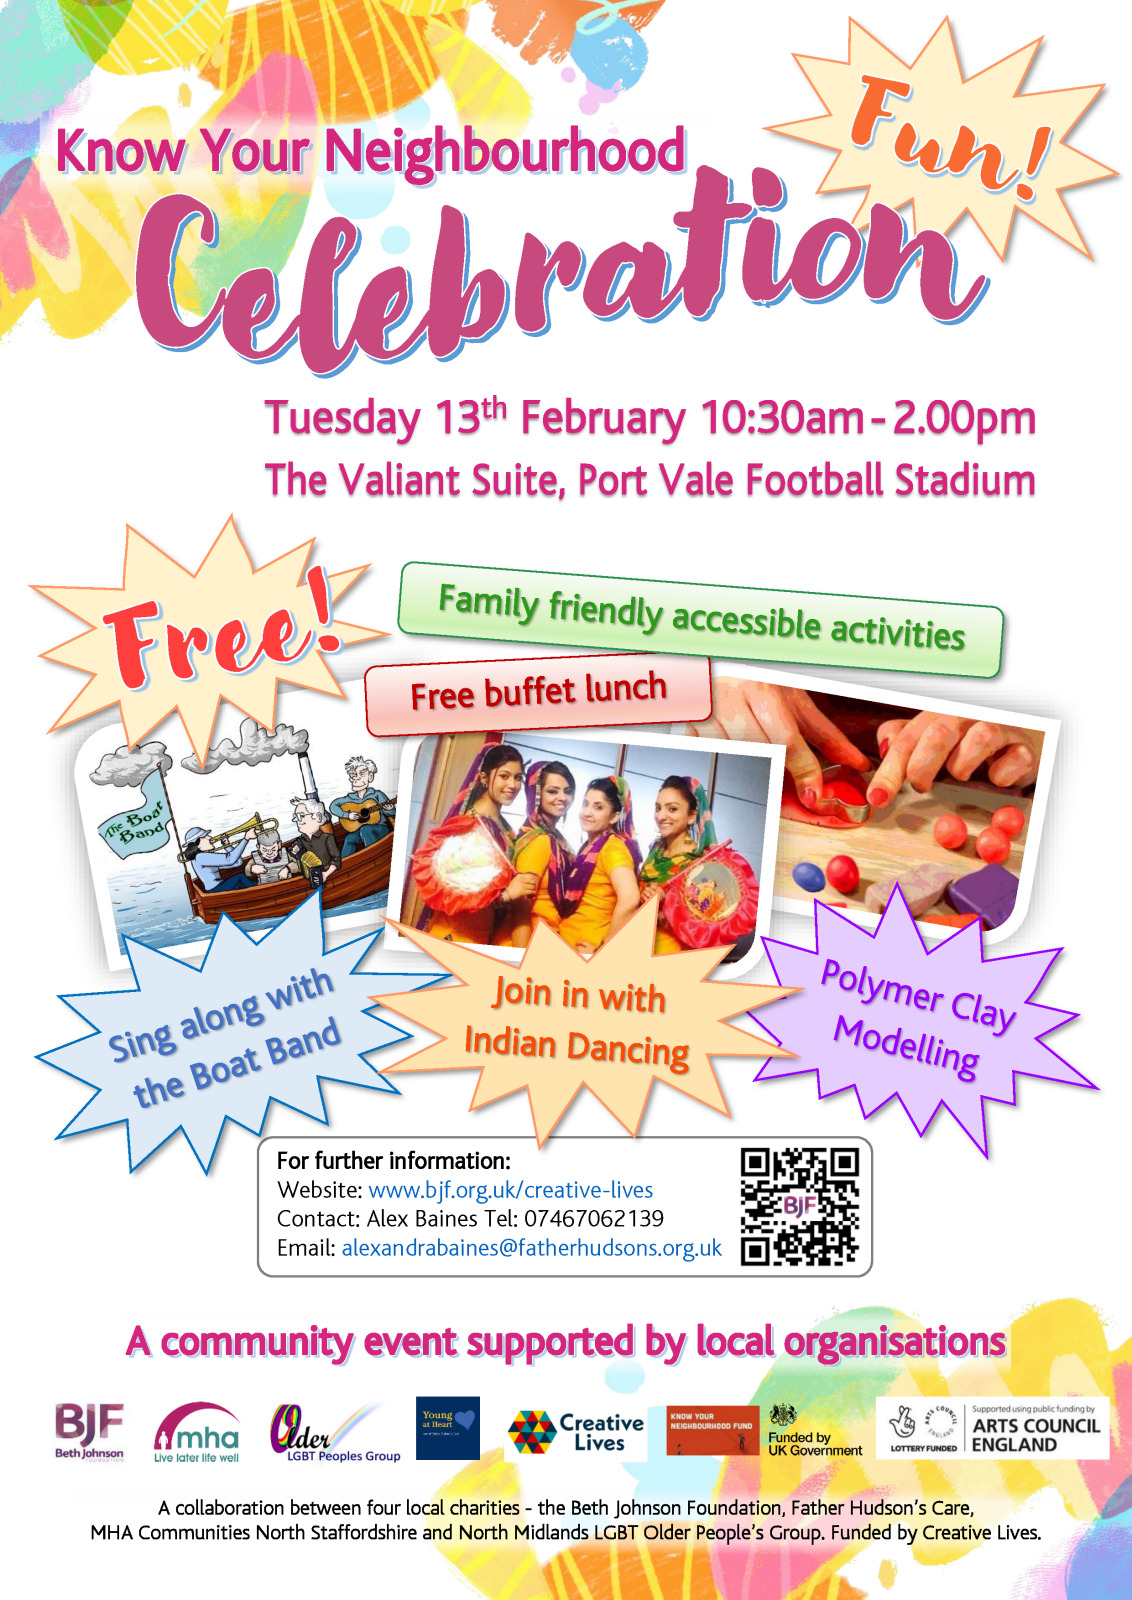 Know Your Neighbourhood Celebration Event. Text only description of the promotional flyer for people with visual impairment. Main Heading : Know Your Neighbourhood Celebration Event Date: Tuesday 13th February 10:30am - 2.00pm Venue: The Valiant Suite, Port Vale Football Stadium The flyer is bright and vibrant with pastel coloured creative shapes in the background. There are three pictures: A cartoon of a boat with musicians singing A photograph of four indian dancers in traditional dress smiling A picture of hands shaping coloured modelling clay The words Fun! and Free! Are featured prominently in bursting coloured stars. A montage of text in various coloured shapes says Family friendly accessible activities Free buffet lunch Sing along with the Boat Band Join in with Indian Dancing Polymer Clay Modelling In a box headed for further information it says Website: www.bjf.org.uk/creative-lives Contact: Alex Baines Tel: 07467062139 Email: alexandrabaines@fatherhudsons.org.uk Description of the footer of the flyer: Heading: A community event supported by local organisations There are small logos of partner organisations and funders - The Beth Johnson Foundation, MHA Communities North Staffordshire, North Midlands LGBT Older People’s Group, Young at Heart (Part of Father Hudson's Care), Creative Lives, Know Your Neighbourhood Fund, Funded by UK Government, Lottery Funded - Supported using public funding by Arts Council England Text below says A collaboration between four local charities - the Beth Johnson Foundation, Father Hudson’s Care, MHA Communities North Staffordshire and North Midlands LGBT Older People’s Group. Funded by Creative Lives. End of Text description